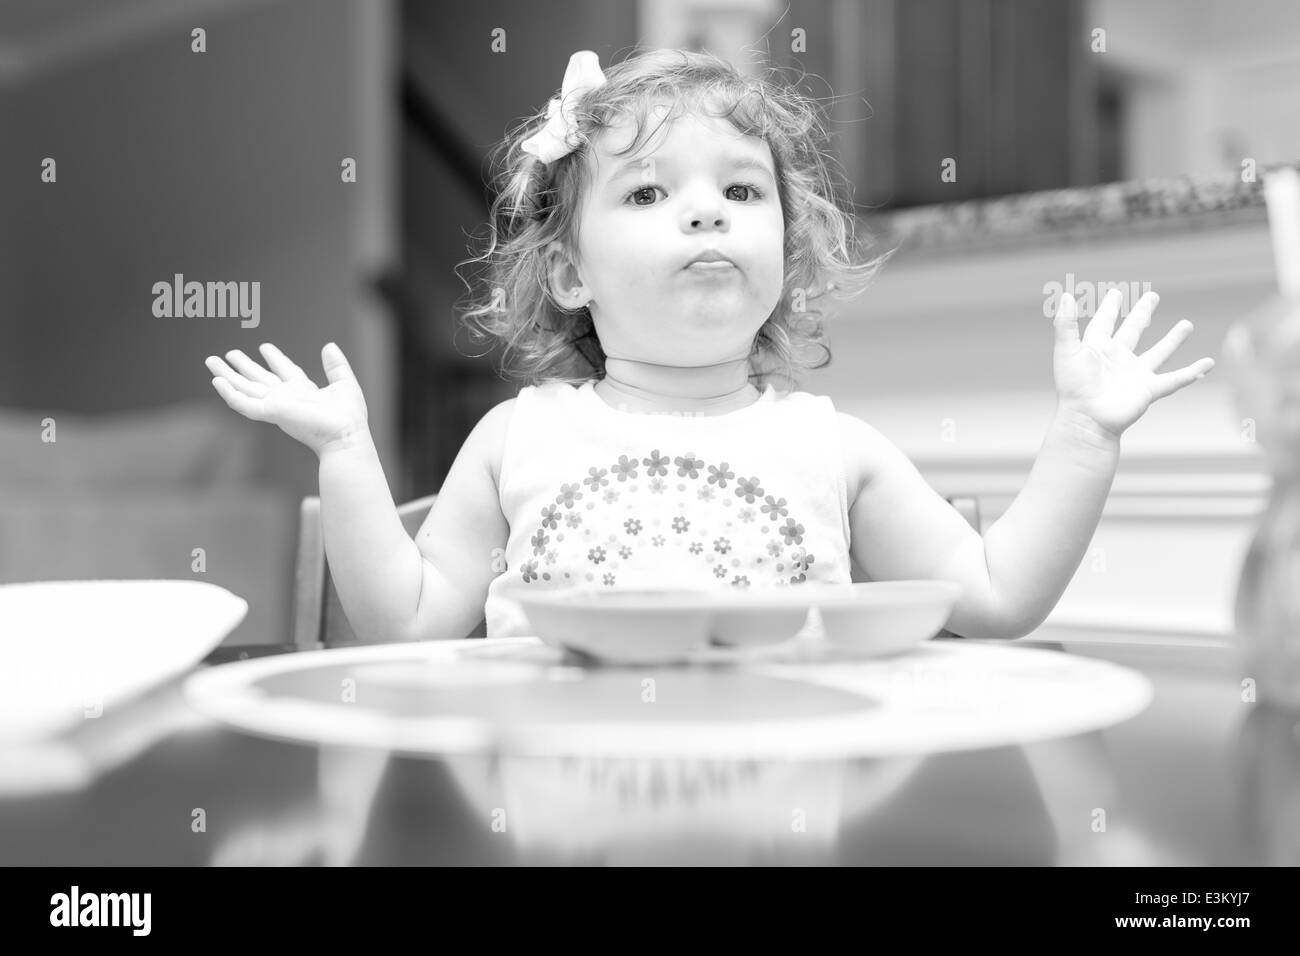 Little girl at dinner time making facial expressions Stock Photo